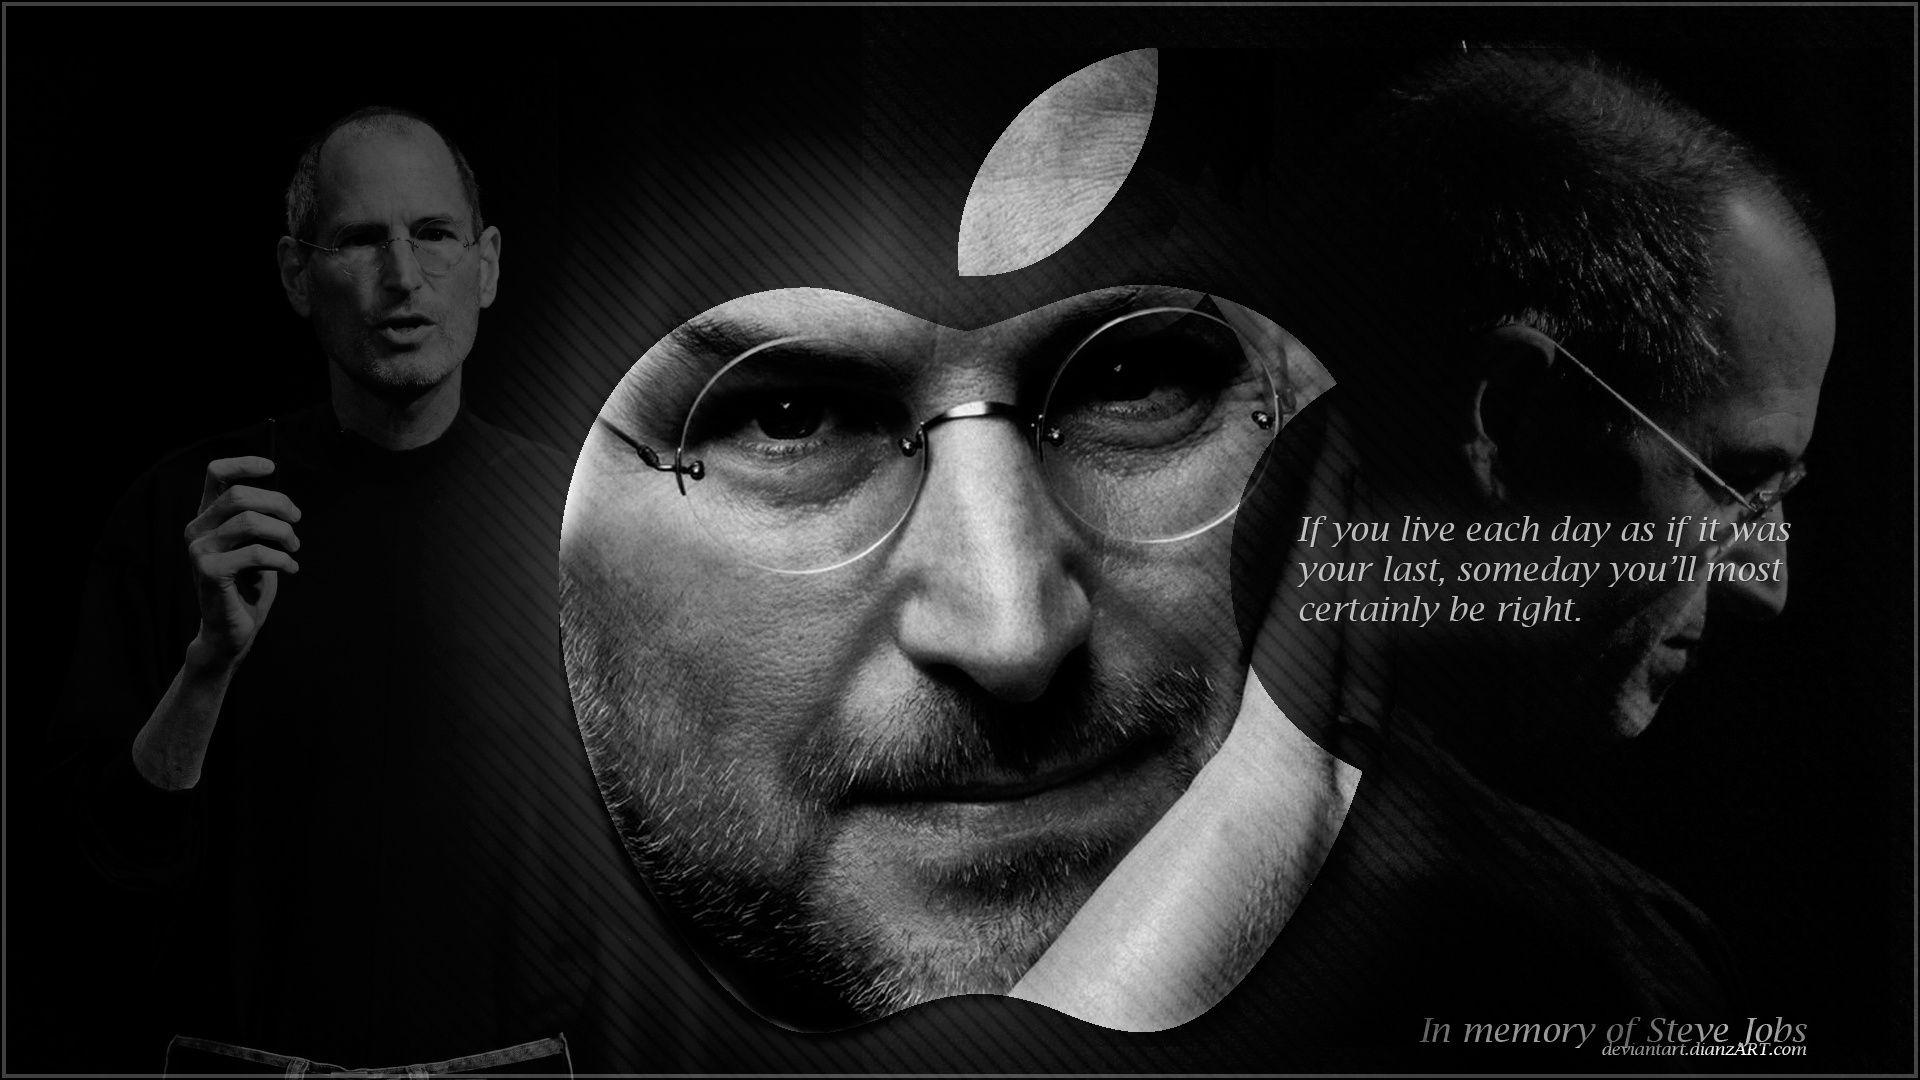 Steve Jobs Quotes Wallpapers - Top Free Steve Jobs Quotes Backgrounds